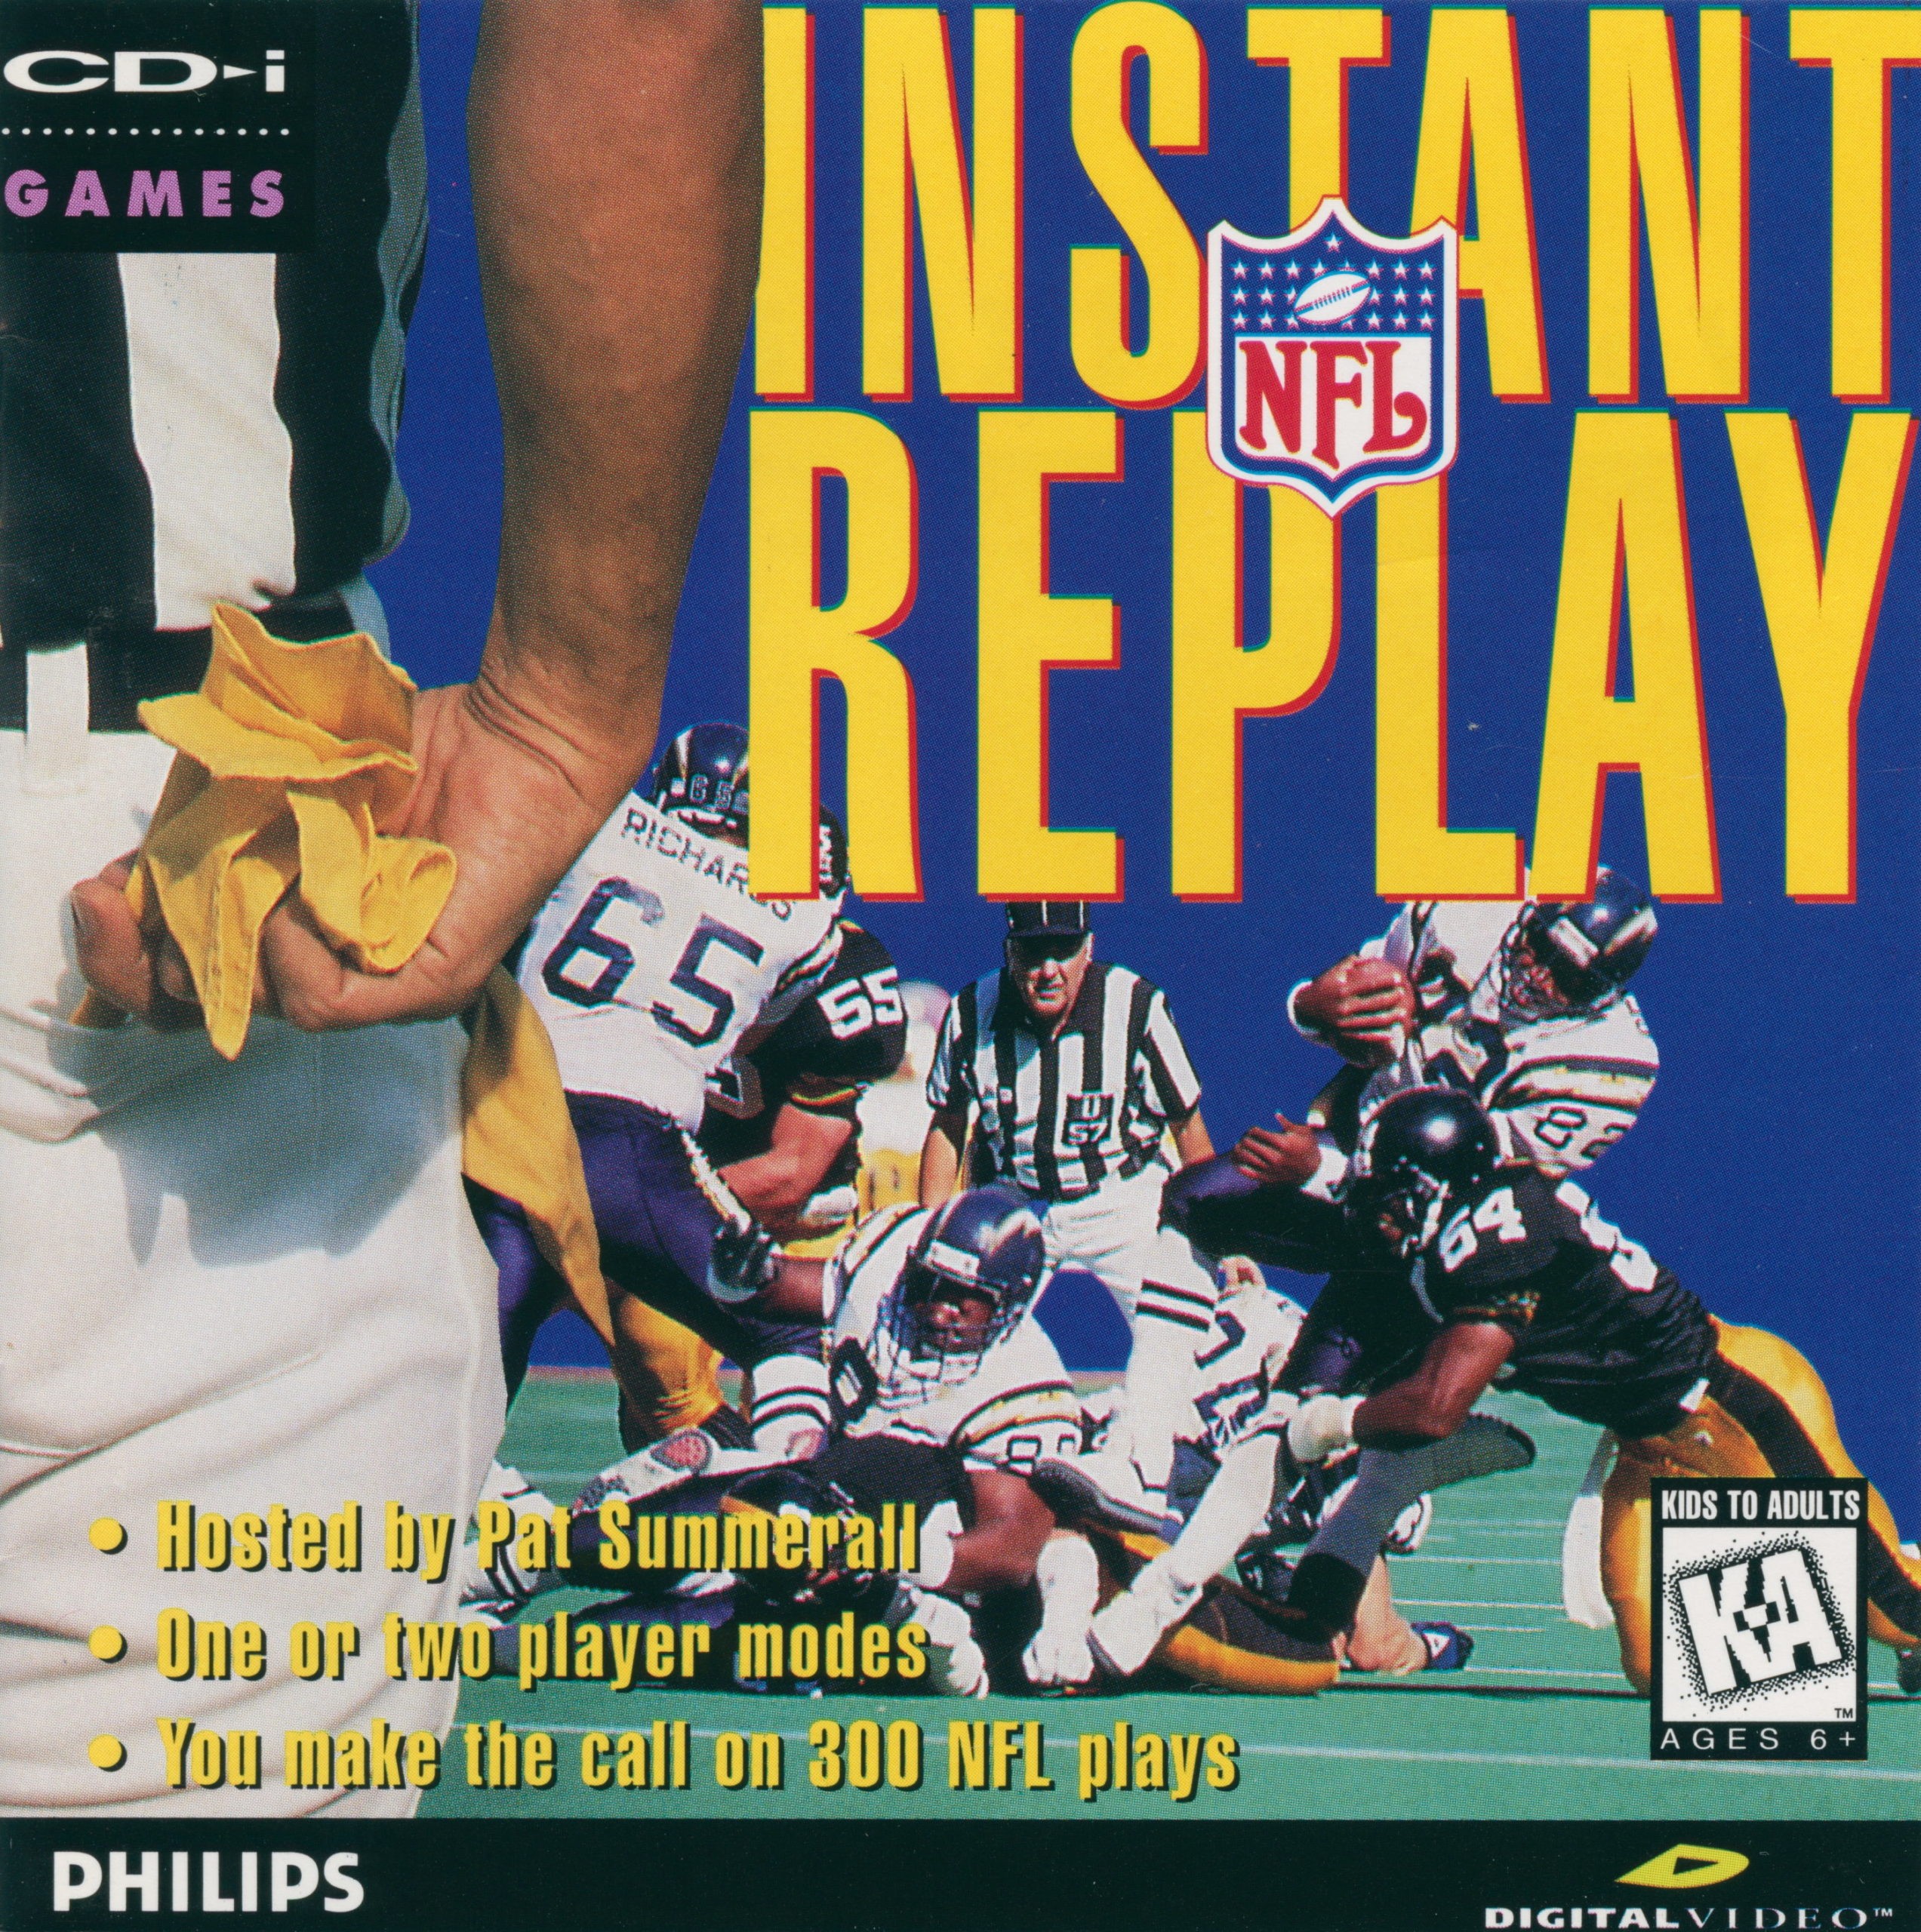 NFL – Instant Replay – The World of CD-i